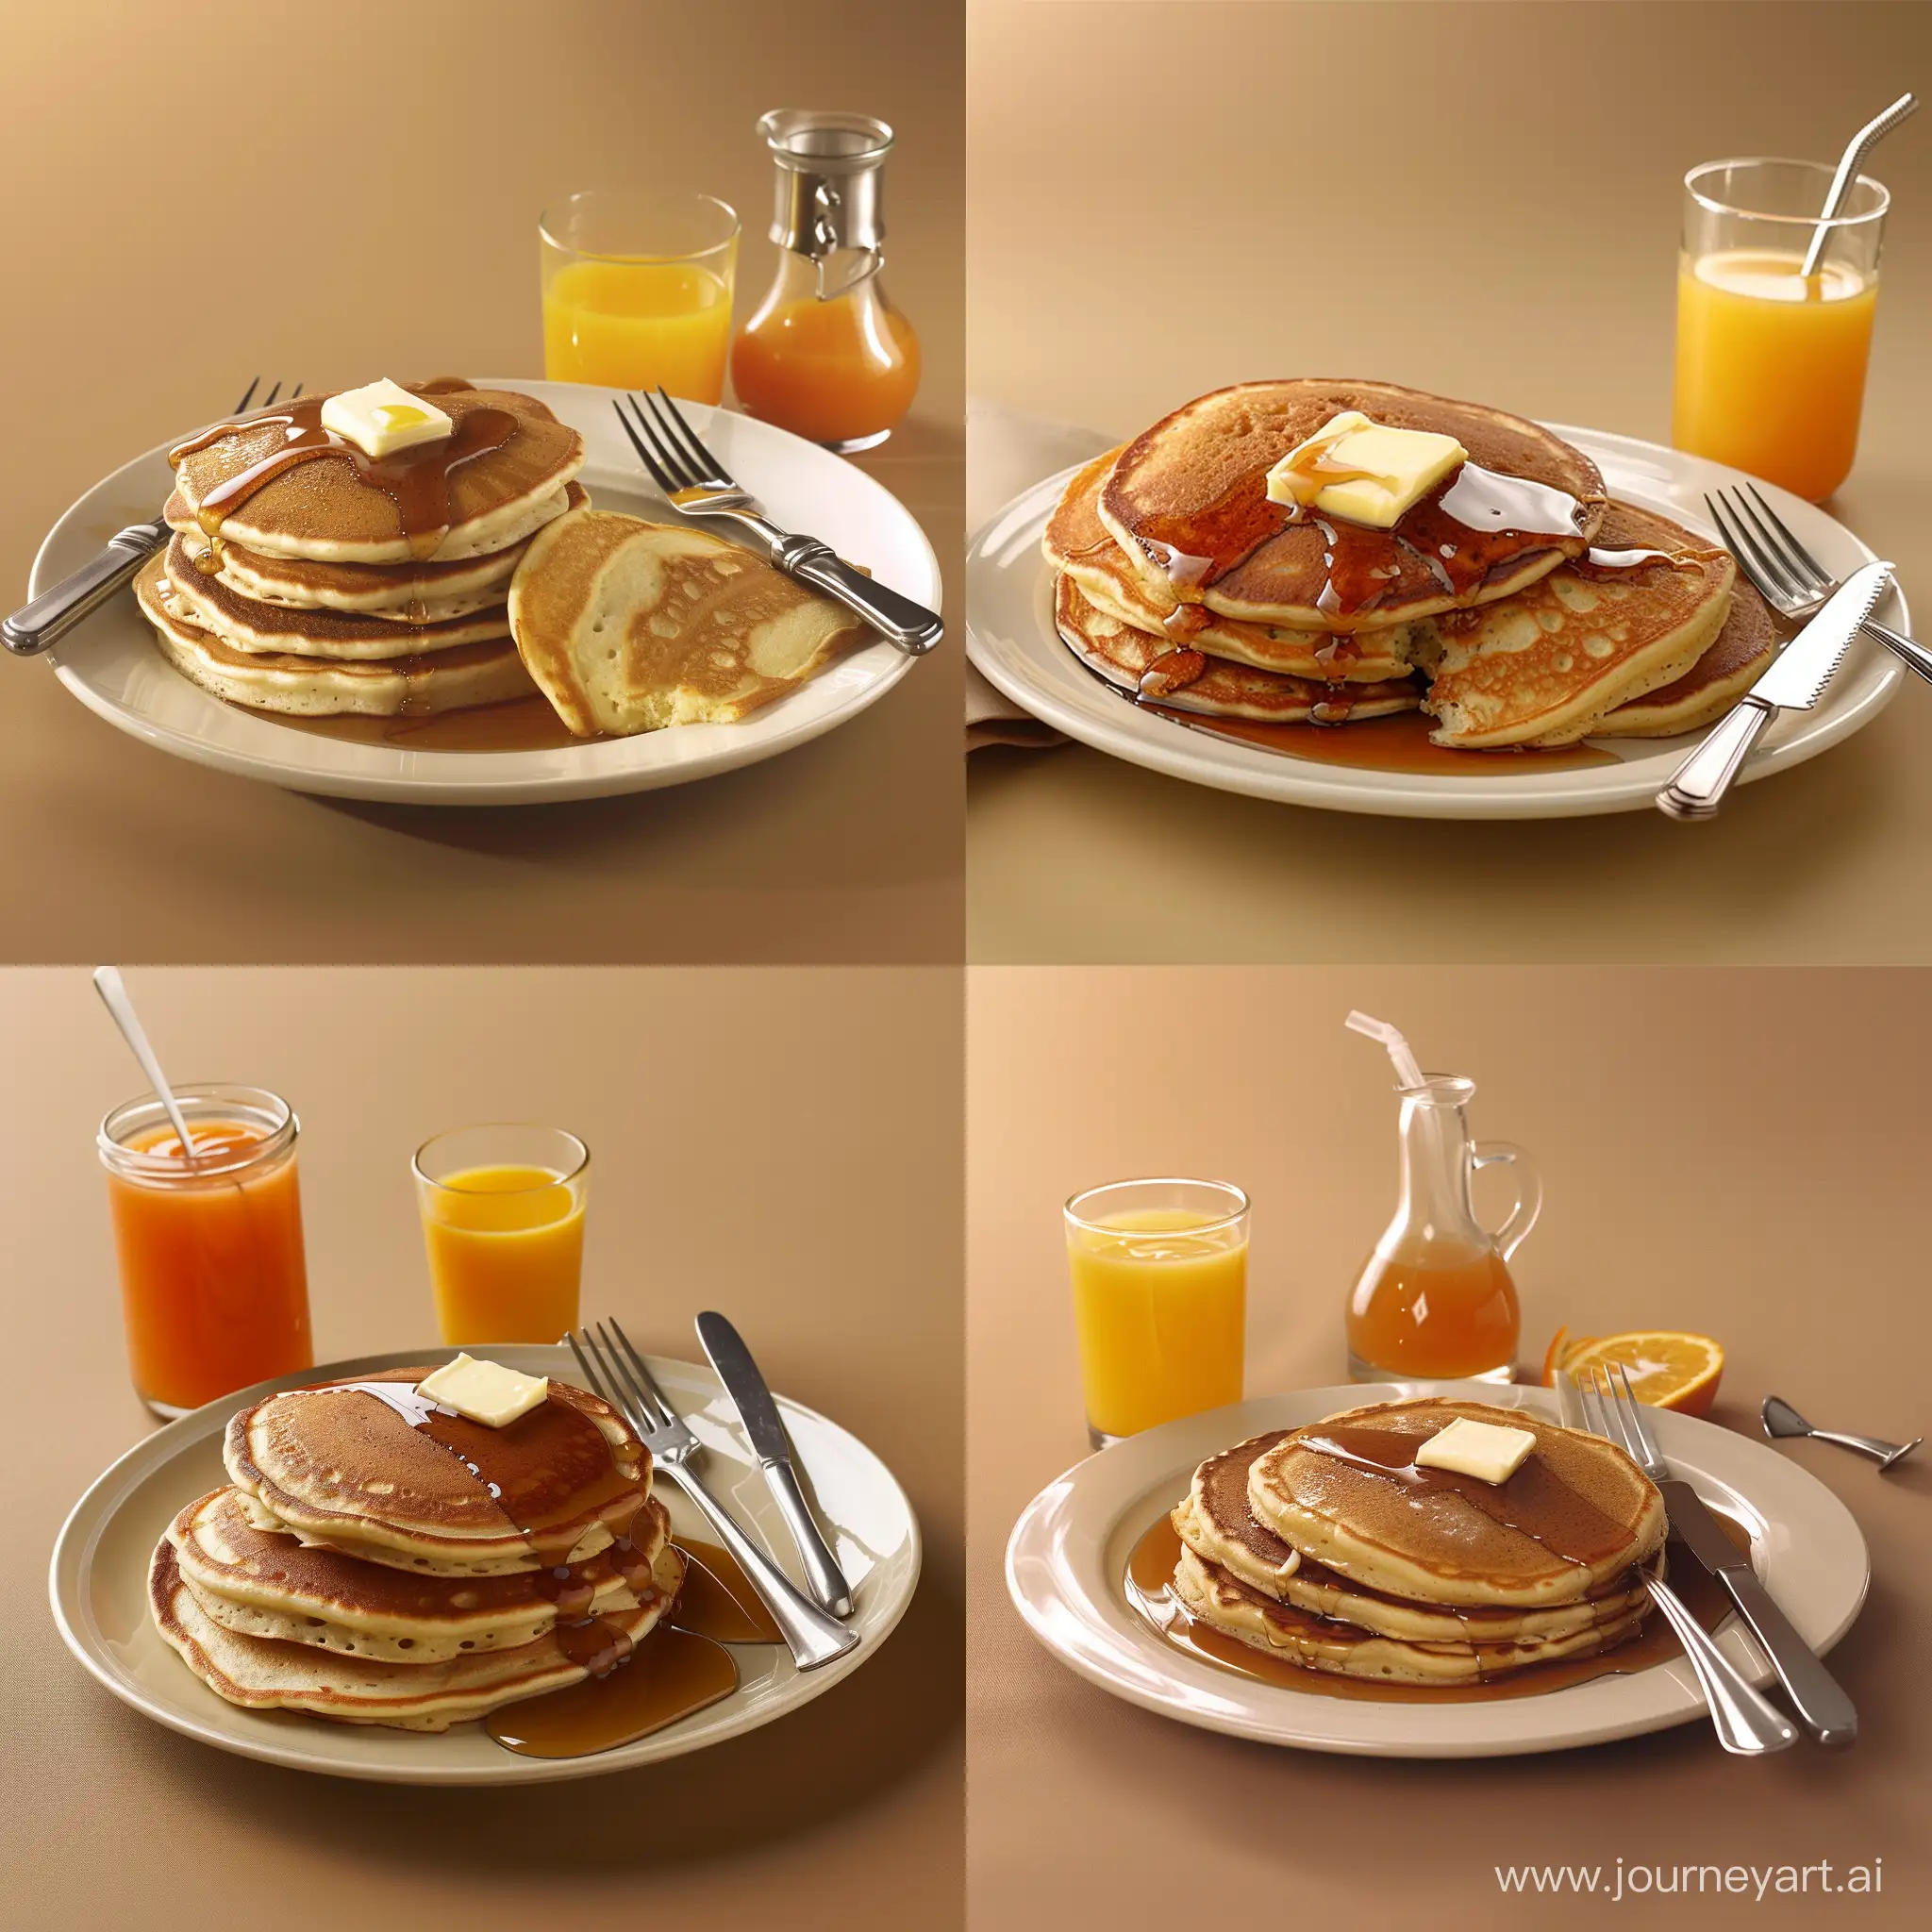  A photo of a plate of pancakes with butter and syrup, a glass of orange juice, and a fork and knife on the side. The background is a solid color. The image is well-lit and the colors are vibrant. The pancakes are fluffy and look delicious. The syrup is thick and gooey. The orange juice is fresh and looks refreshing. The fork and knife are made of stainless steel and are shiny. The plate is white and is round. The background is a solid light brown color. The image is taken from a slightly elevated angle. --v 6 --ar 1:1 --no 29333